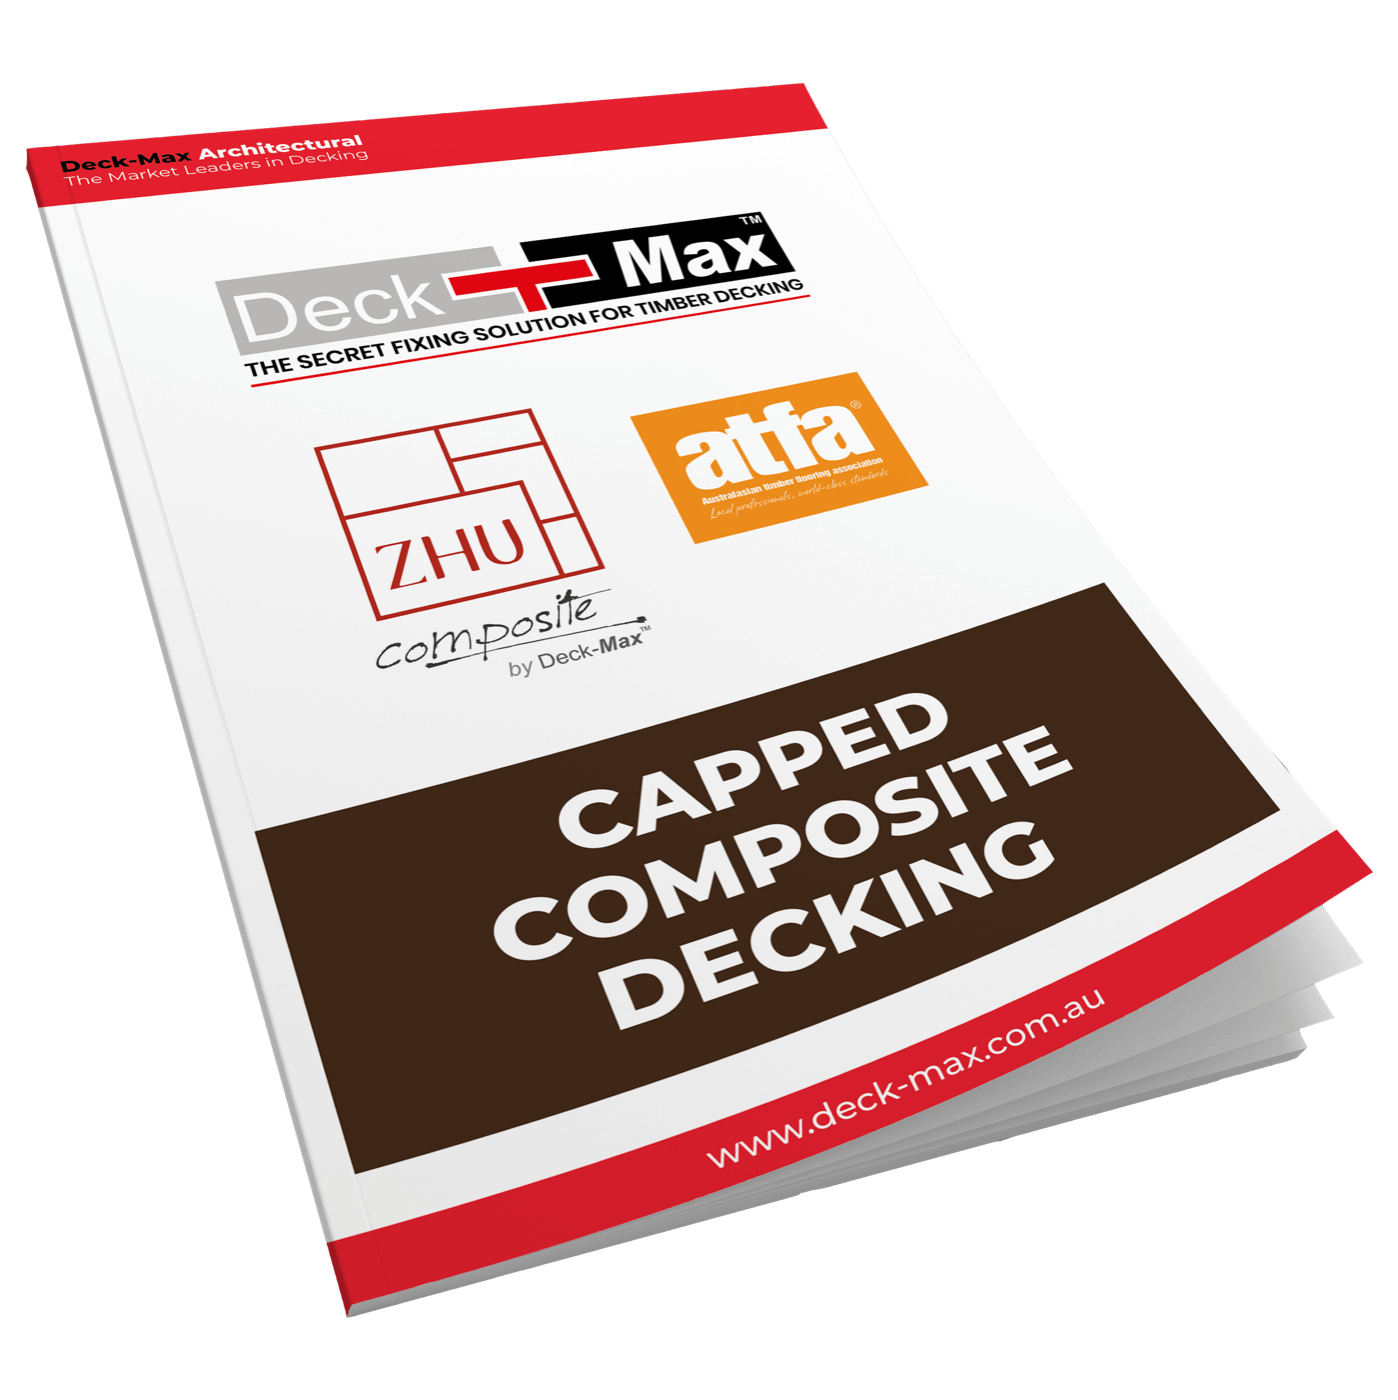 Capped Composite Decking